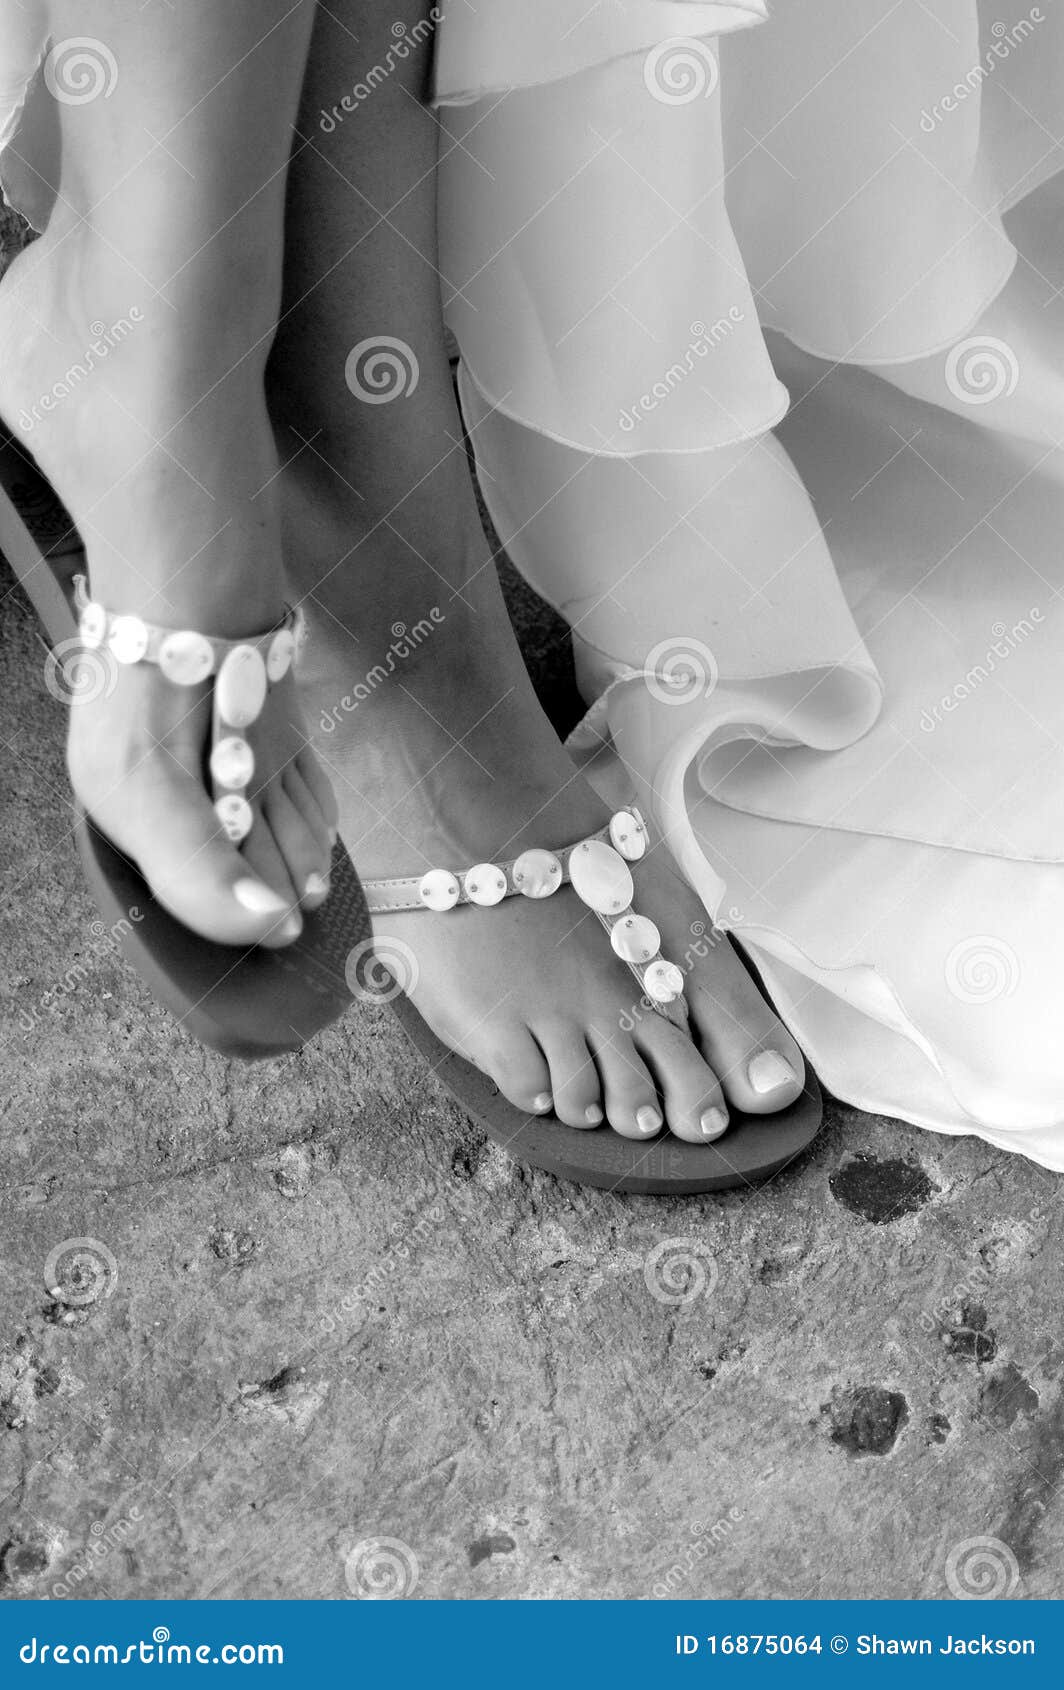 Sandals on bride s feet stock photo. Image of crossed - 16875064